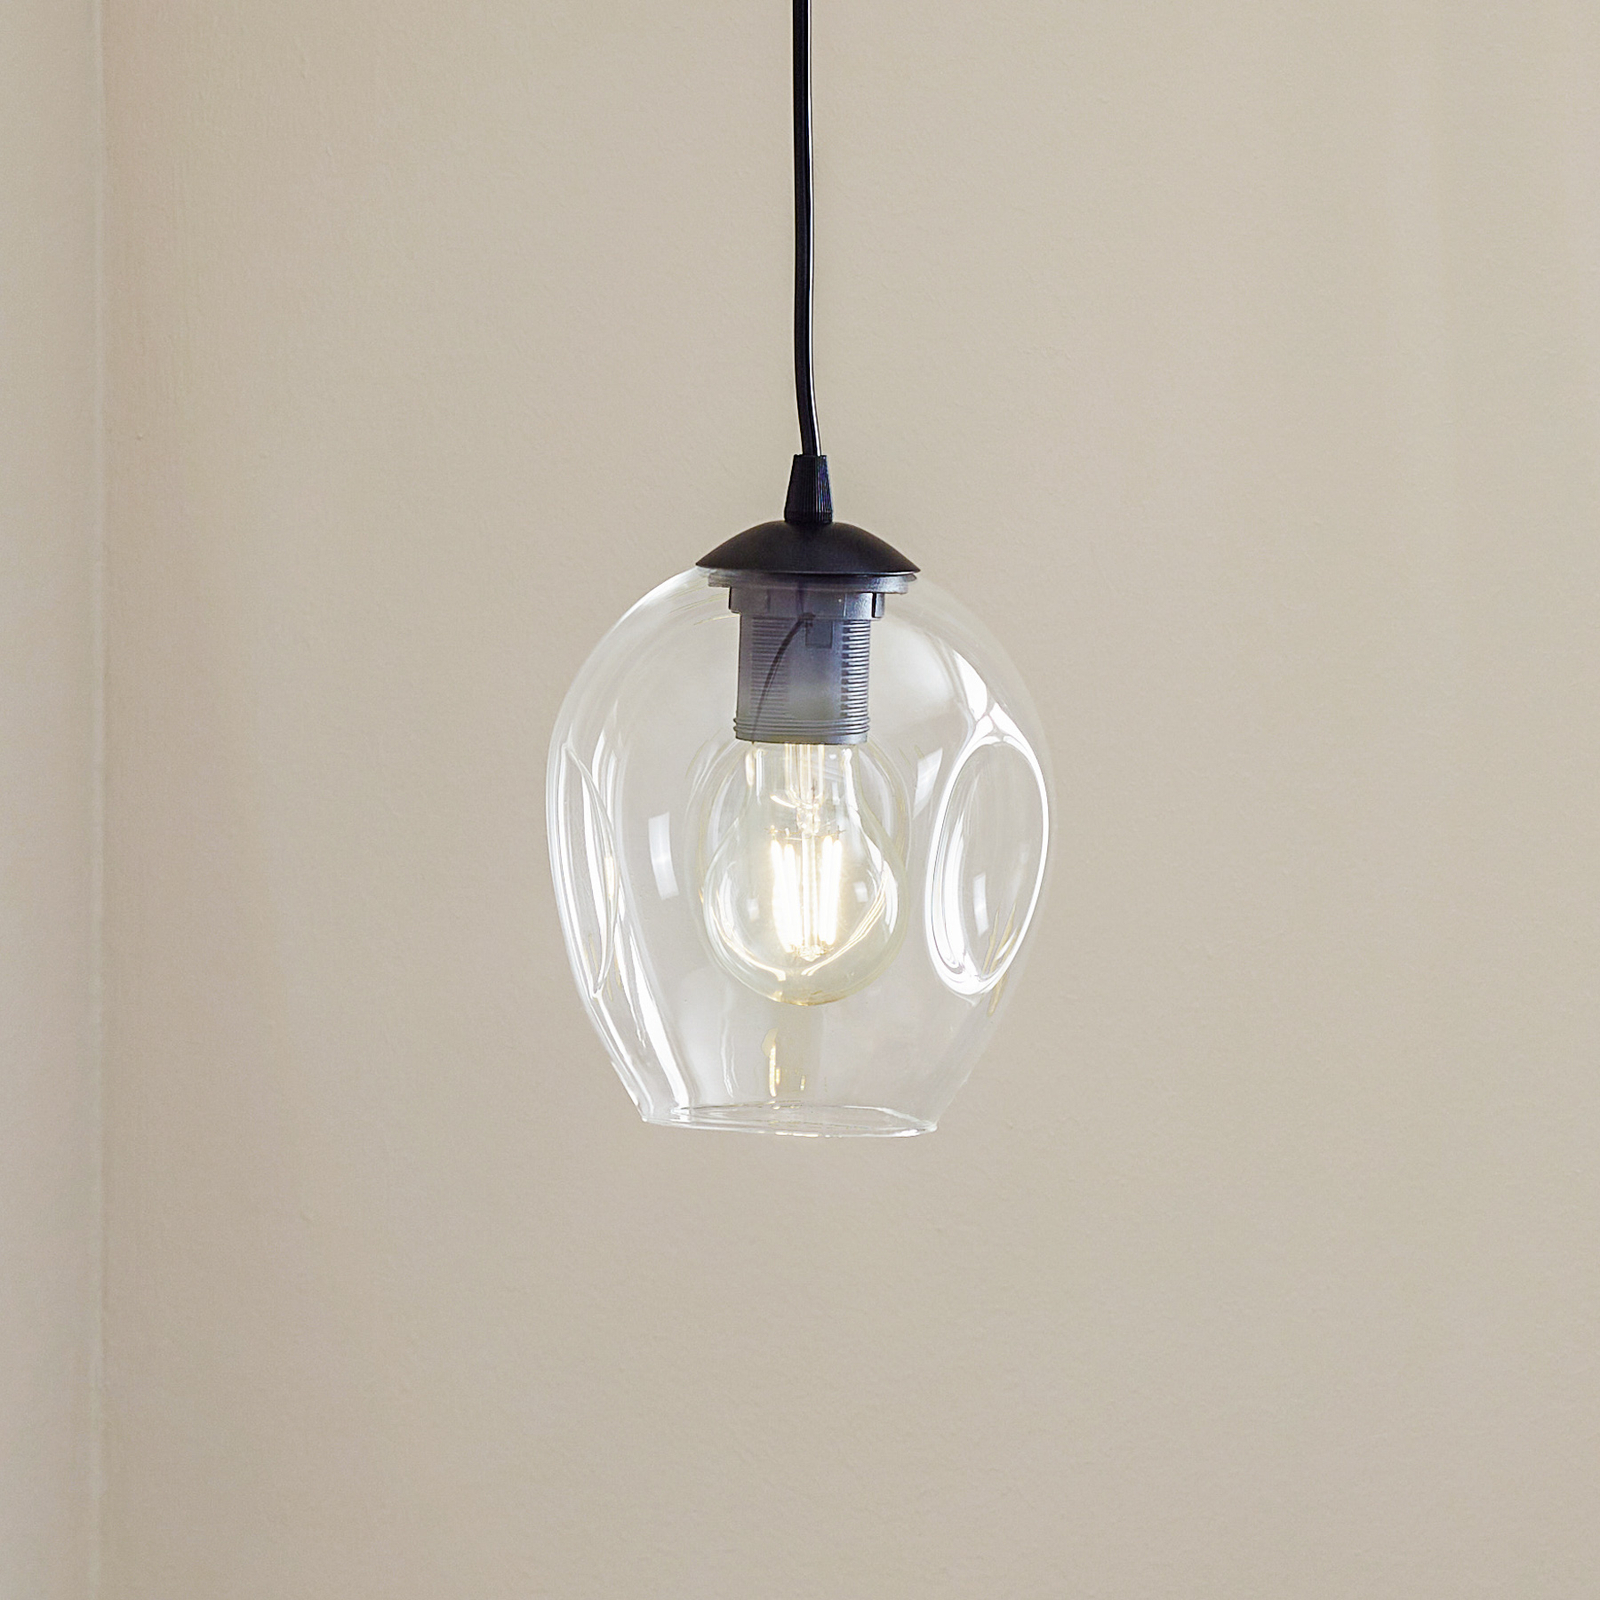 Starla pendant lamp one-bulb clear glass lampshade